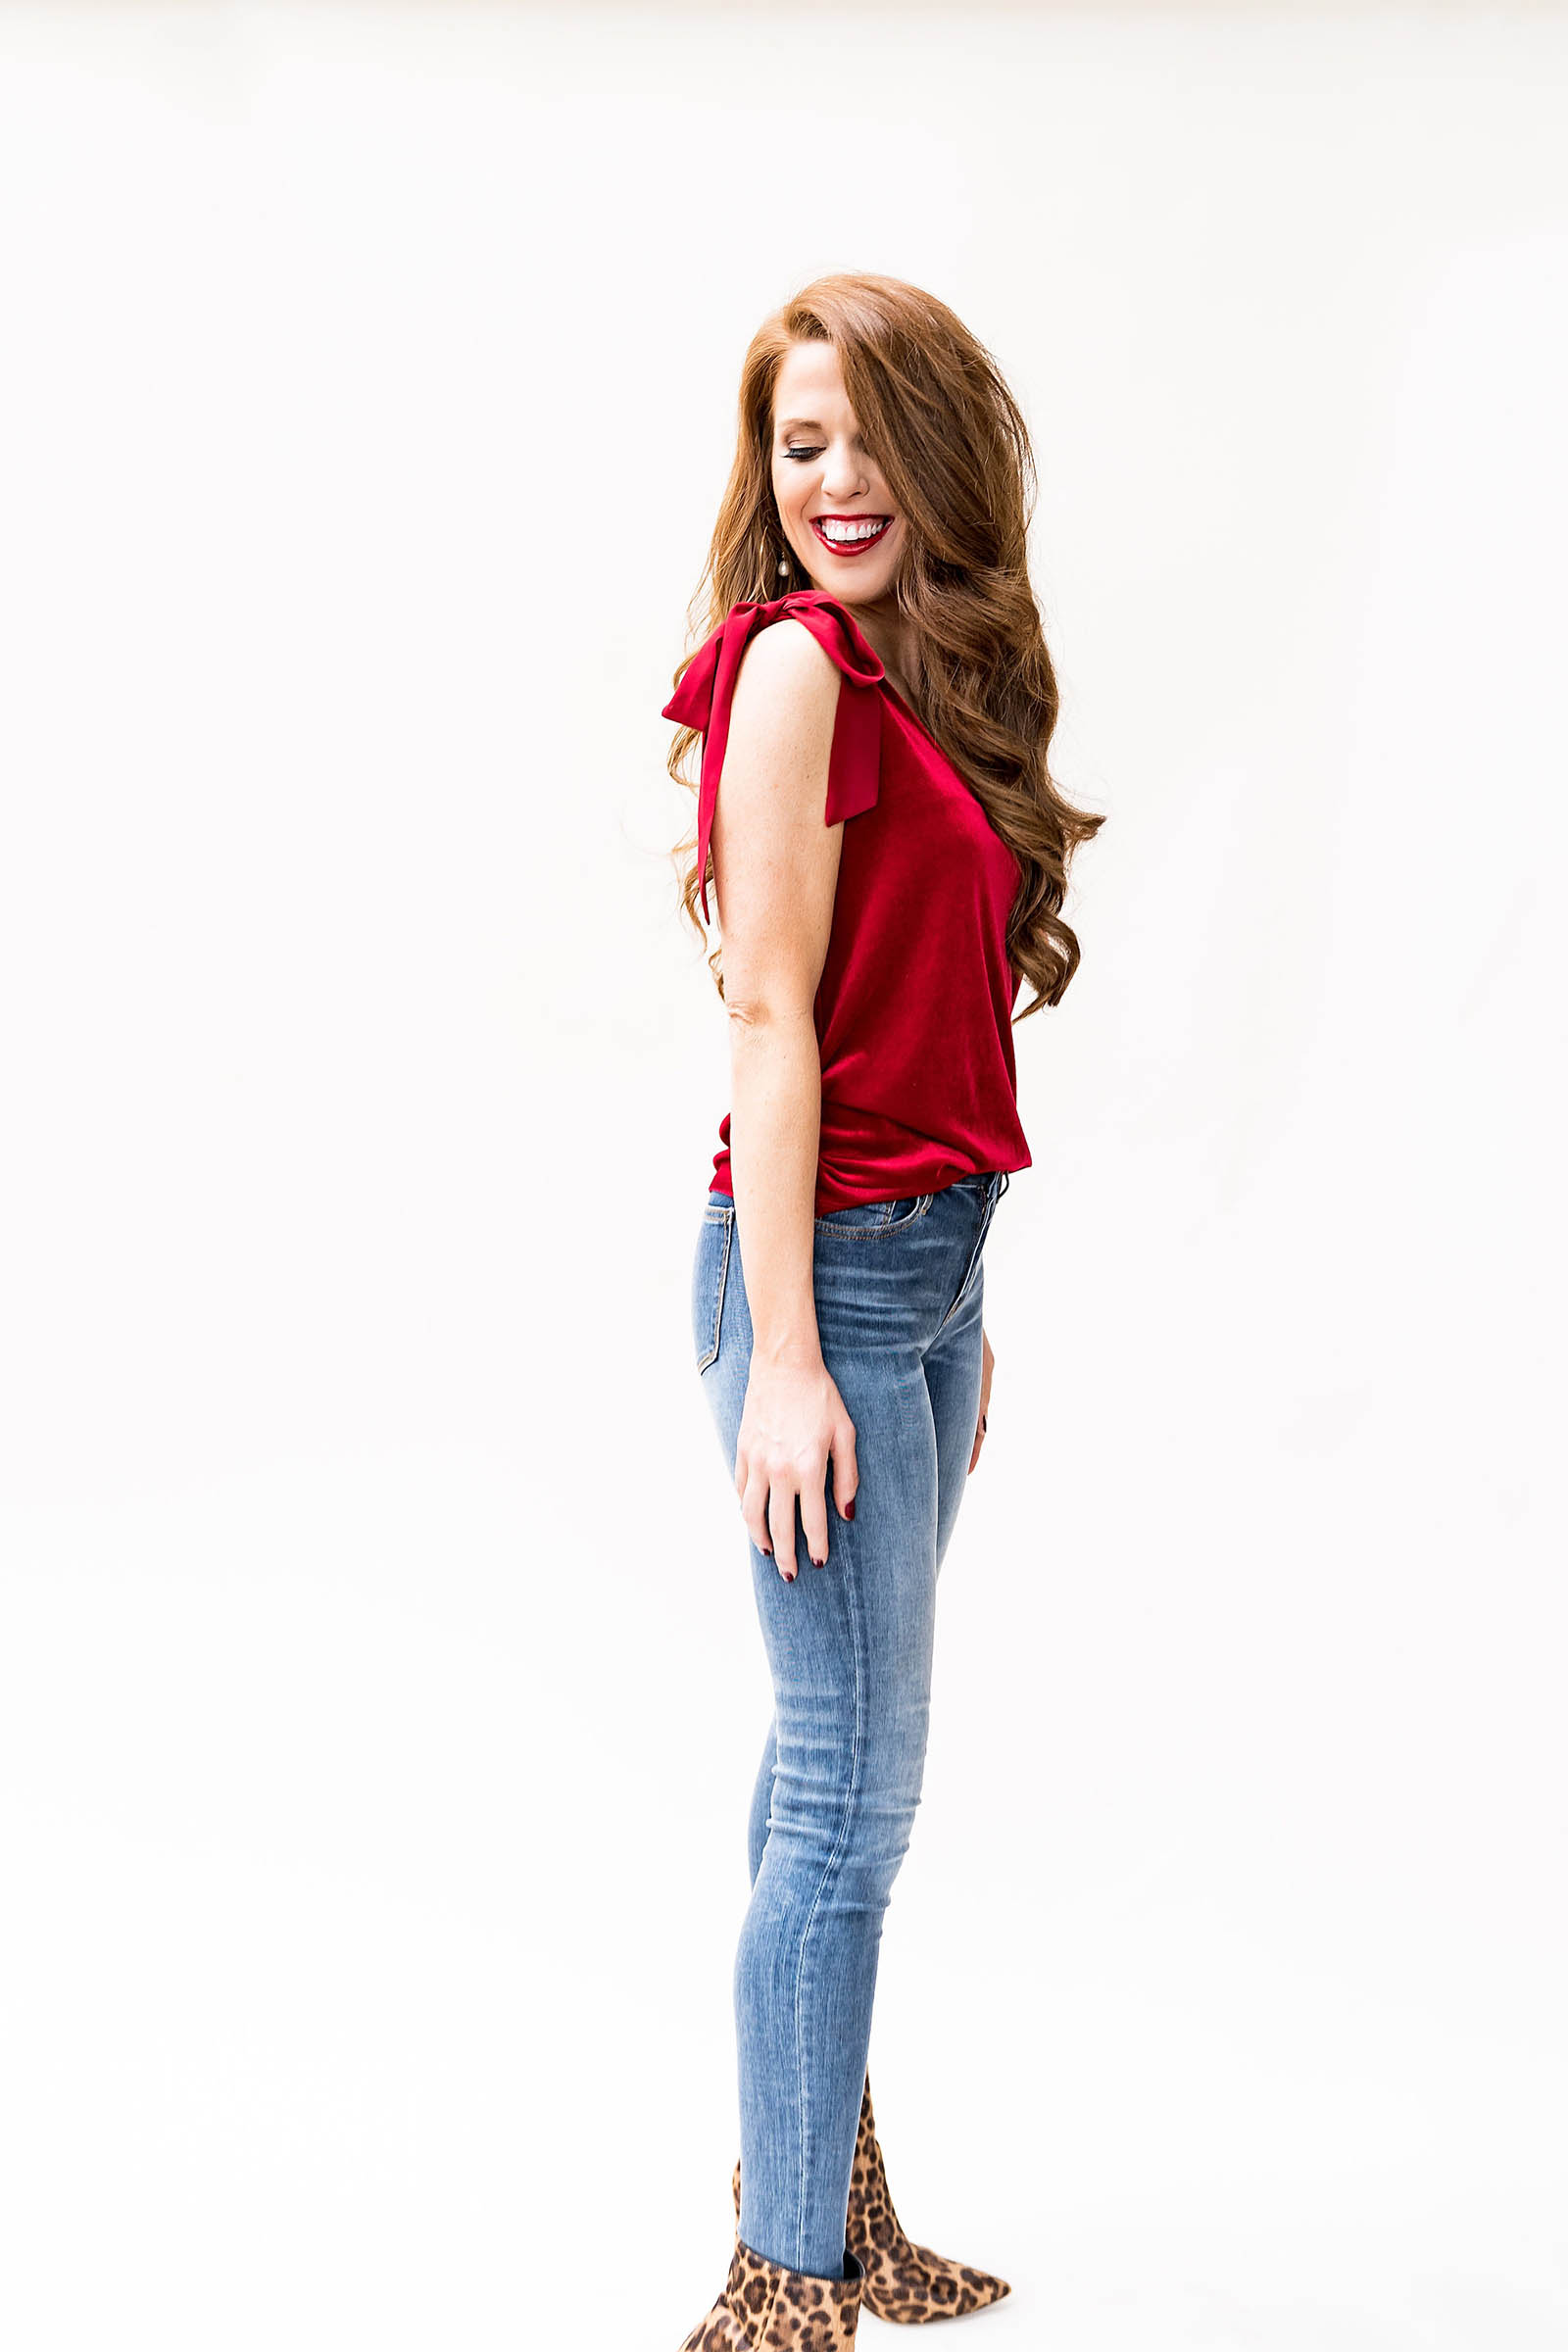 gibson-glam-holiday-red-top-holiday-jean-look 